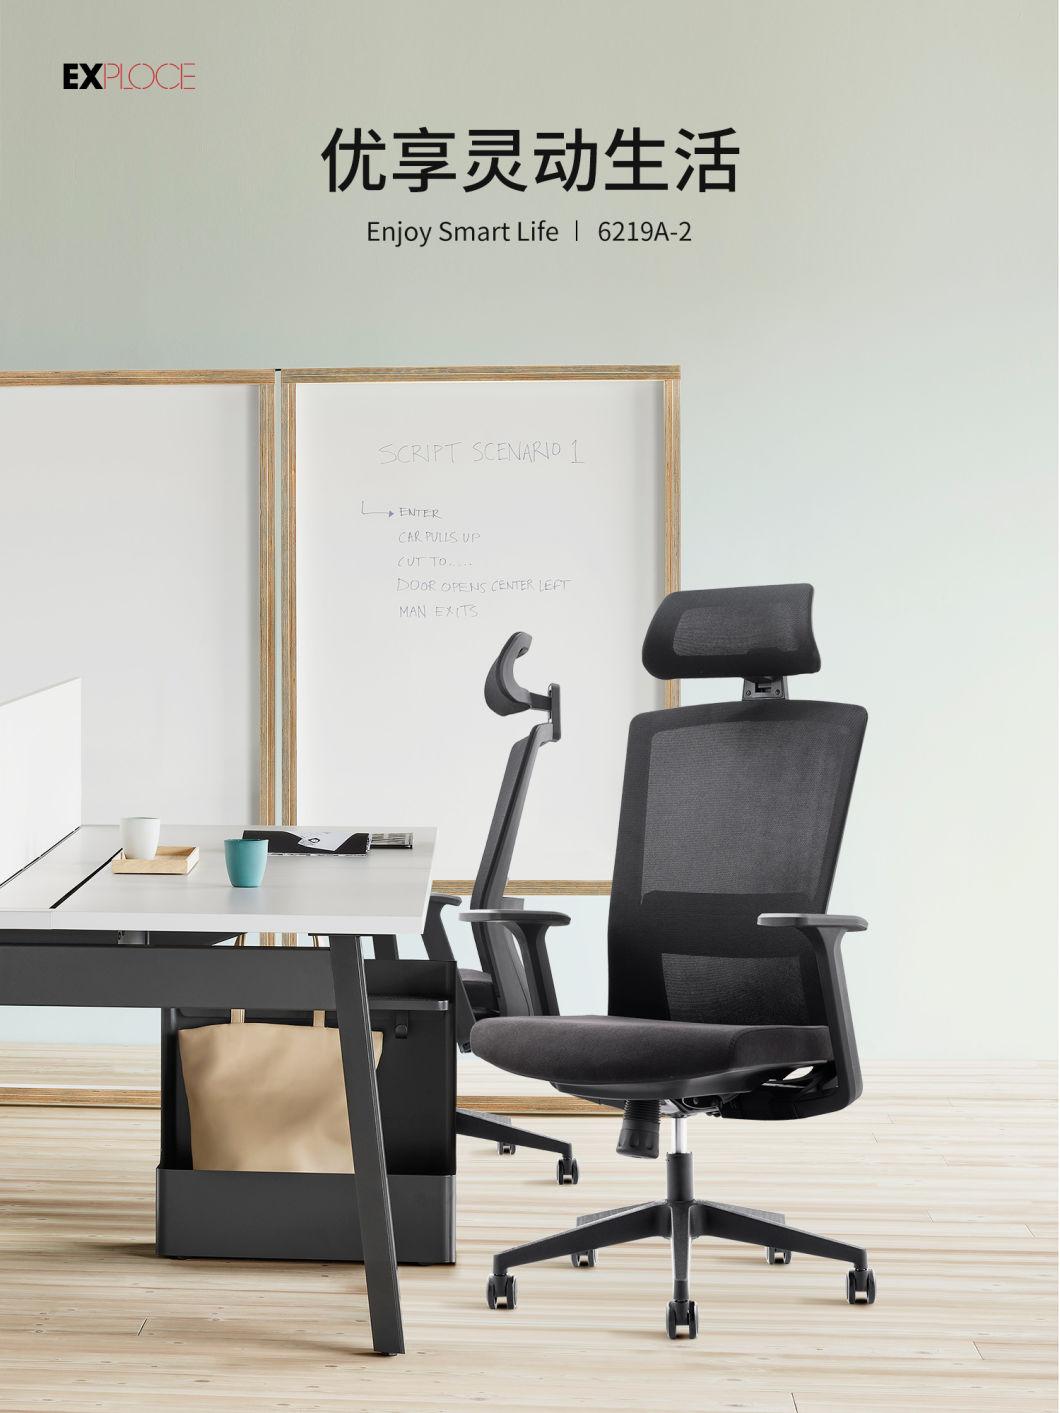 High Performance Customized Foshan Meeting Revolve Staff Seating Fabric Chair Office Furniture